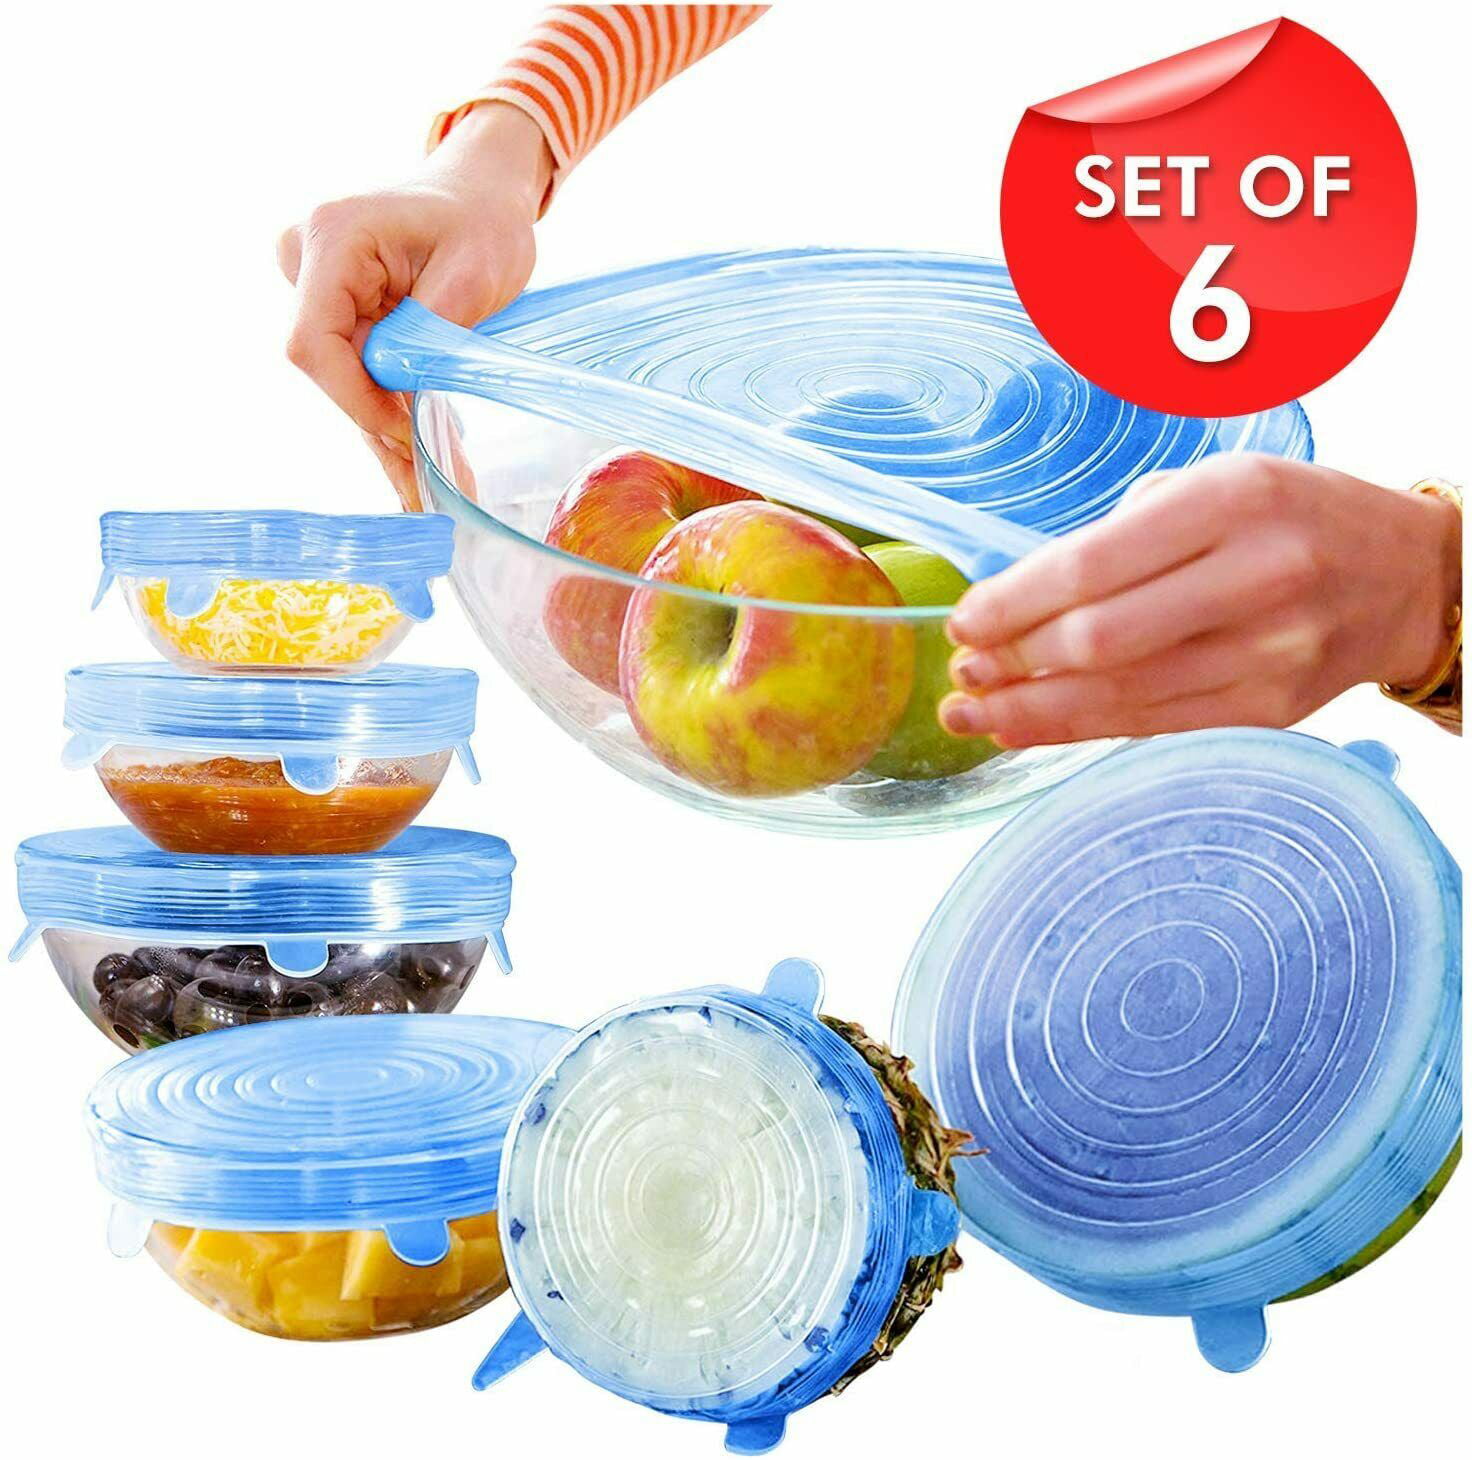 6pcs Reusable Silicone Stretch Lids Wrap Bowl Seal Cover Kitchen Keep Food Fresh